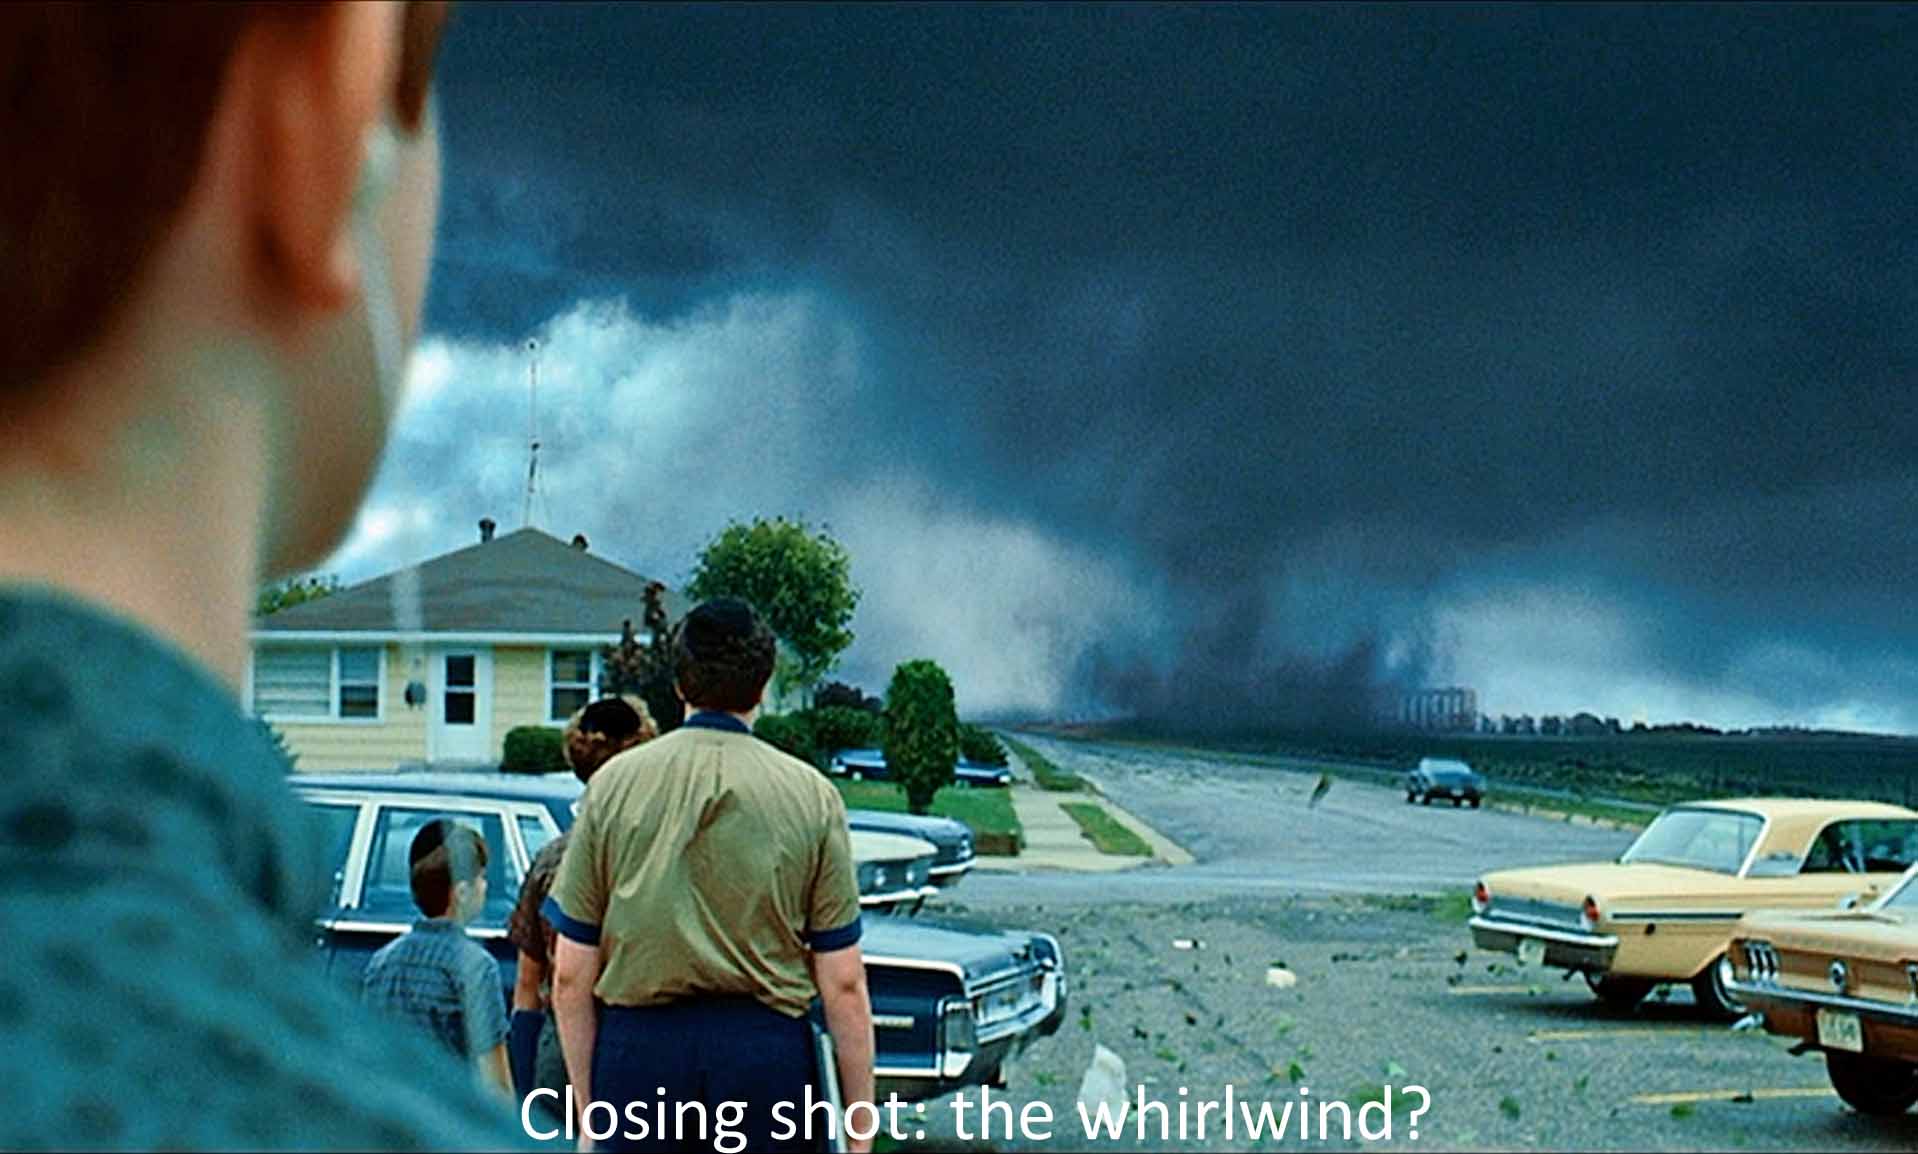 Closing shot: the whirlwind?